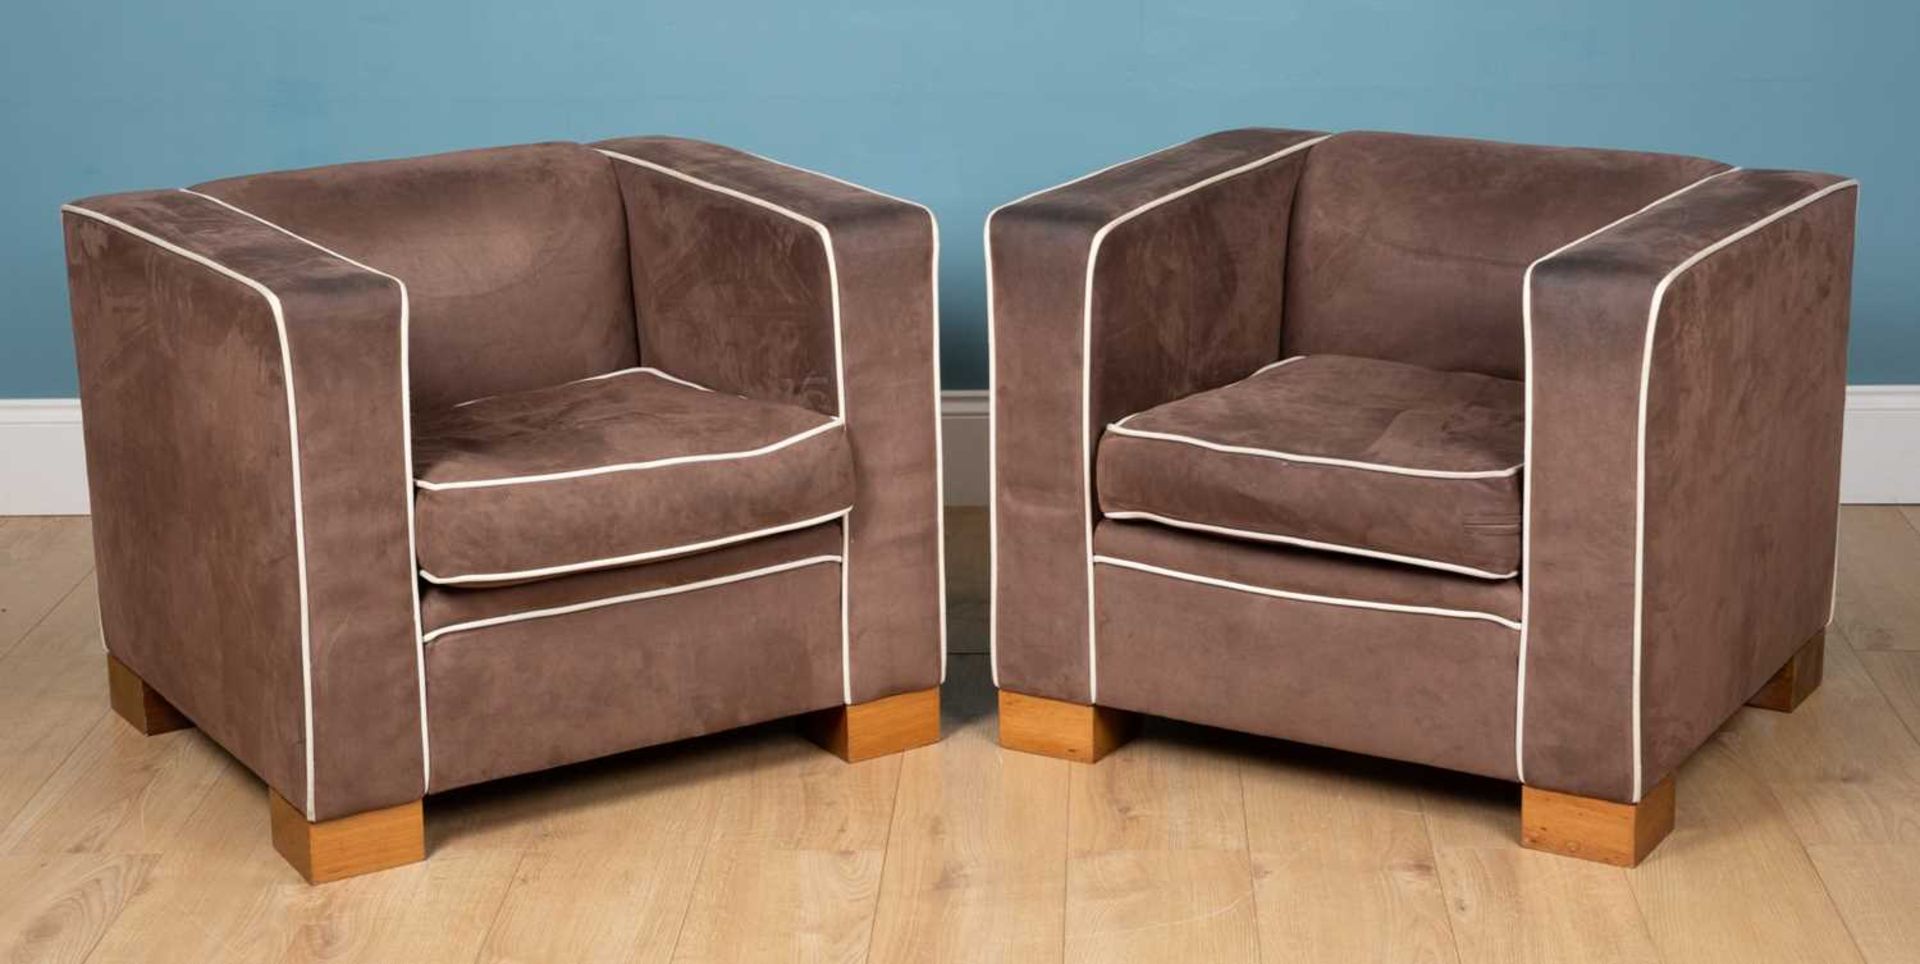 A pair of Linley Art Deco-style armchairs